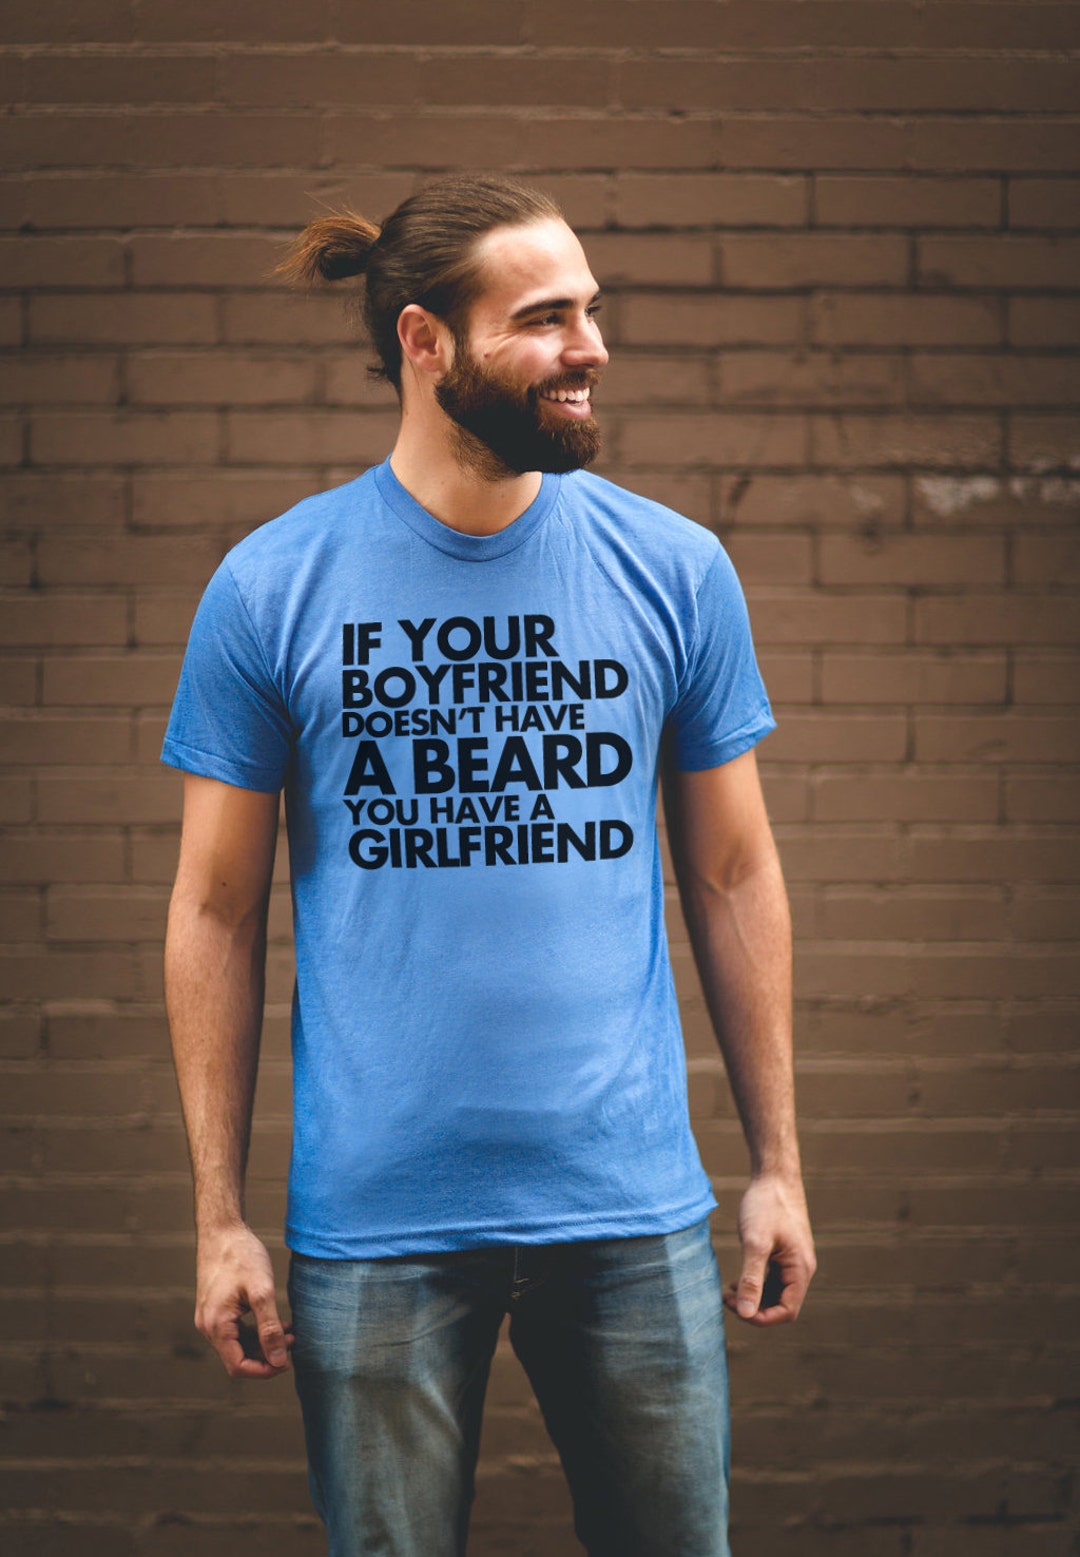 Funny Beard T Shirt If Your Boyfriend Doesn't Have a - Etsy